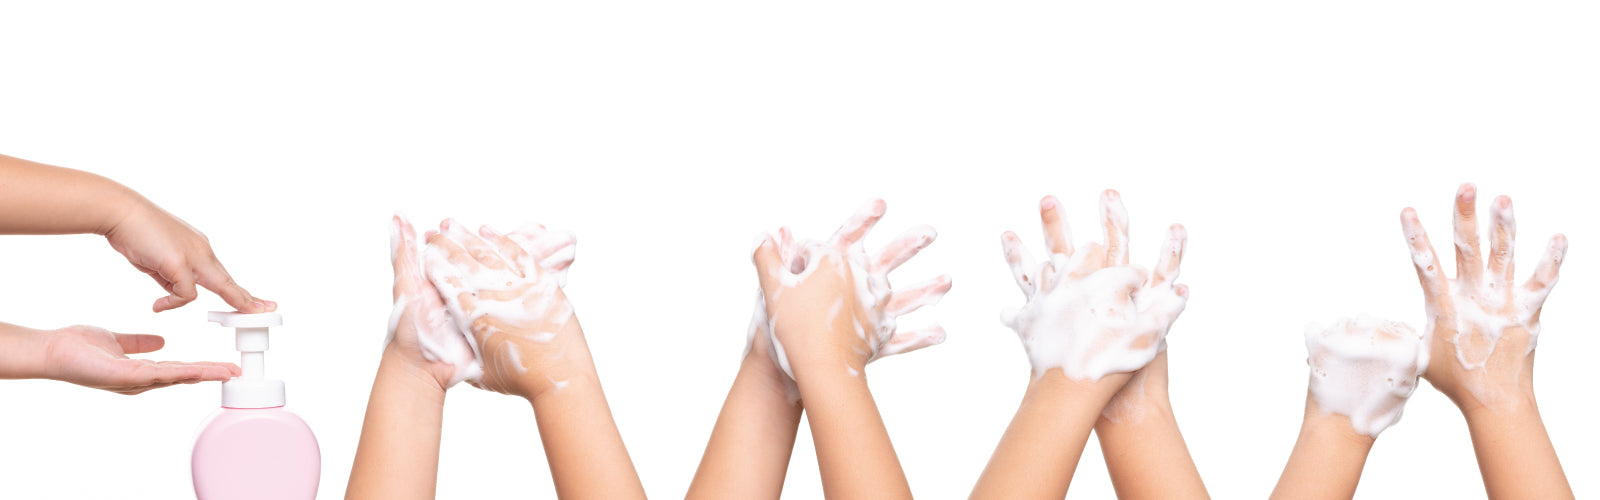 Why Handwashing is Important